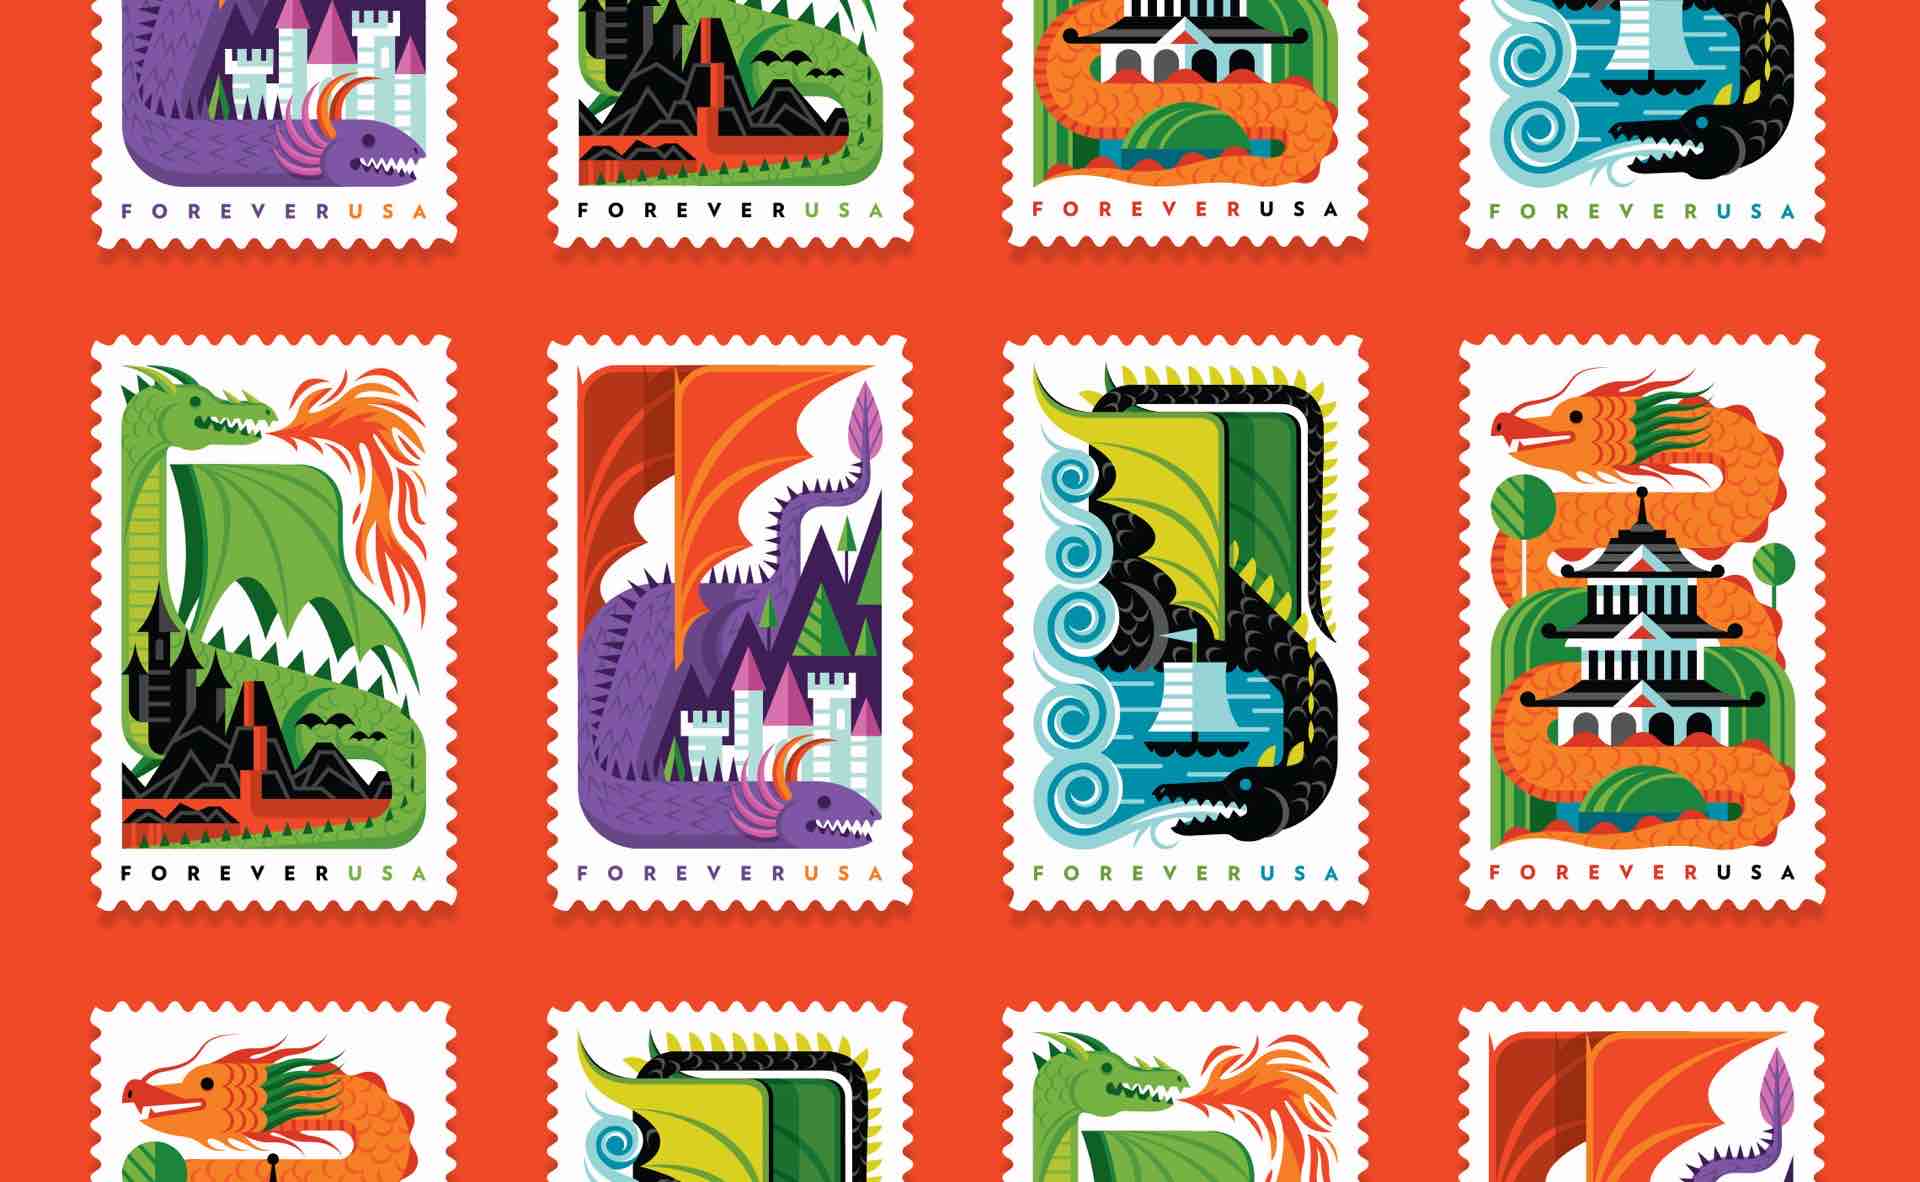 invisible-creature-usps-dragons-forever-usa-postage-stamps